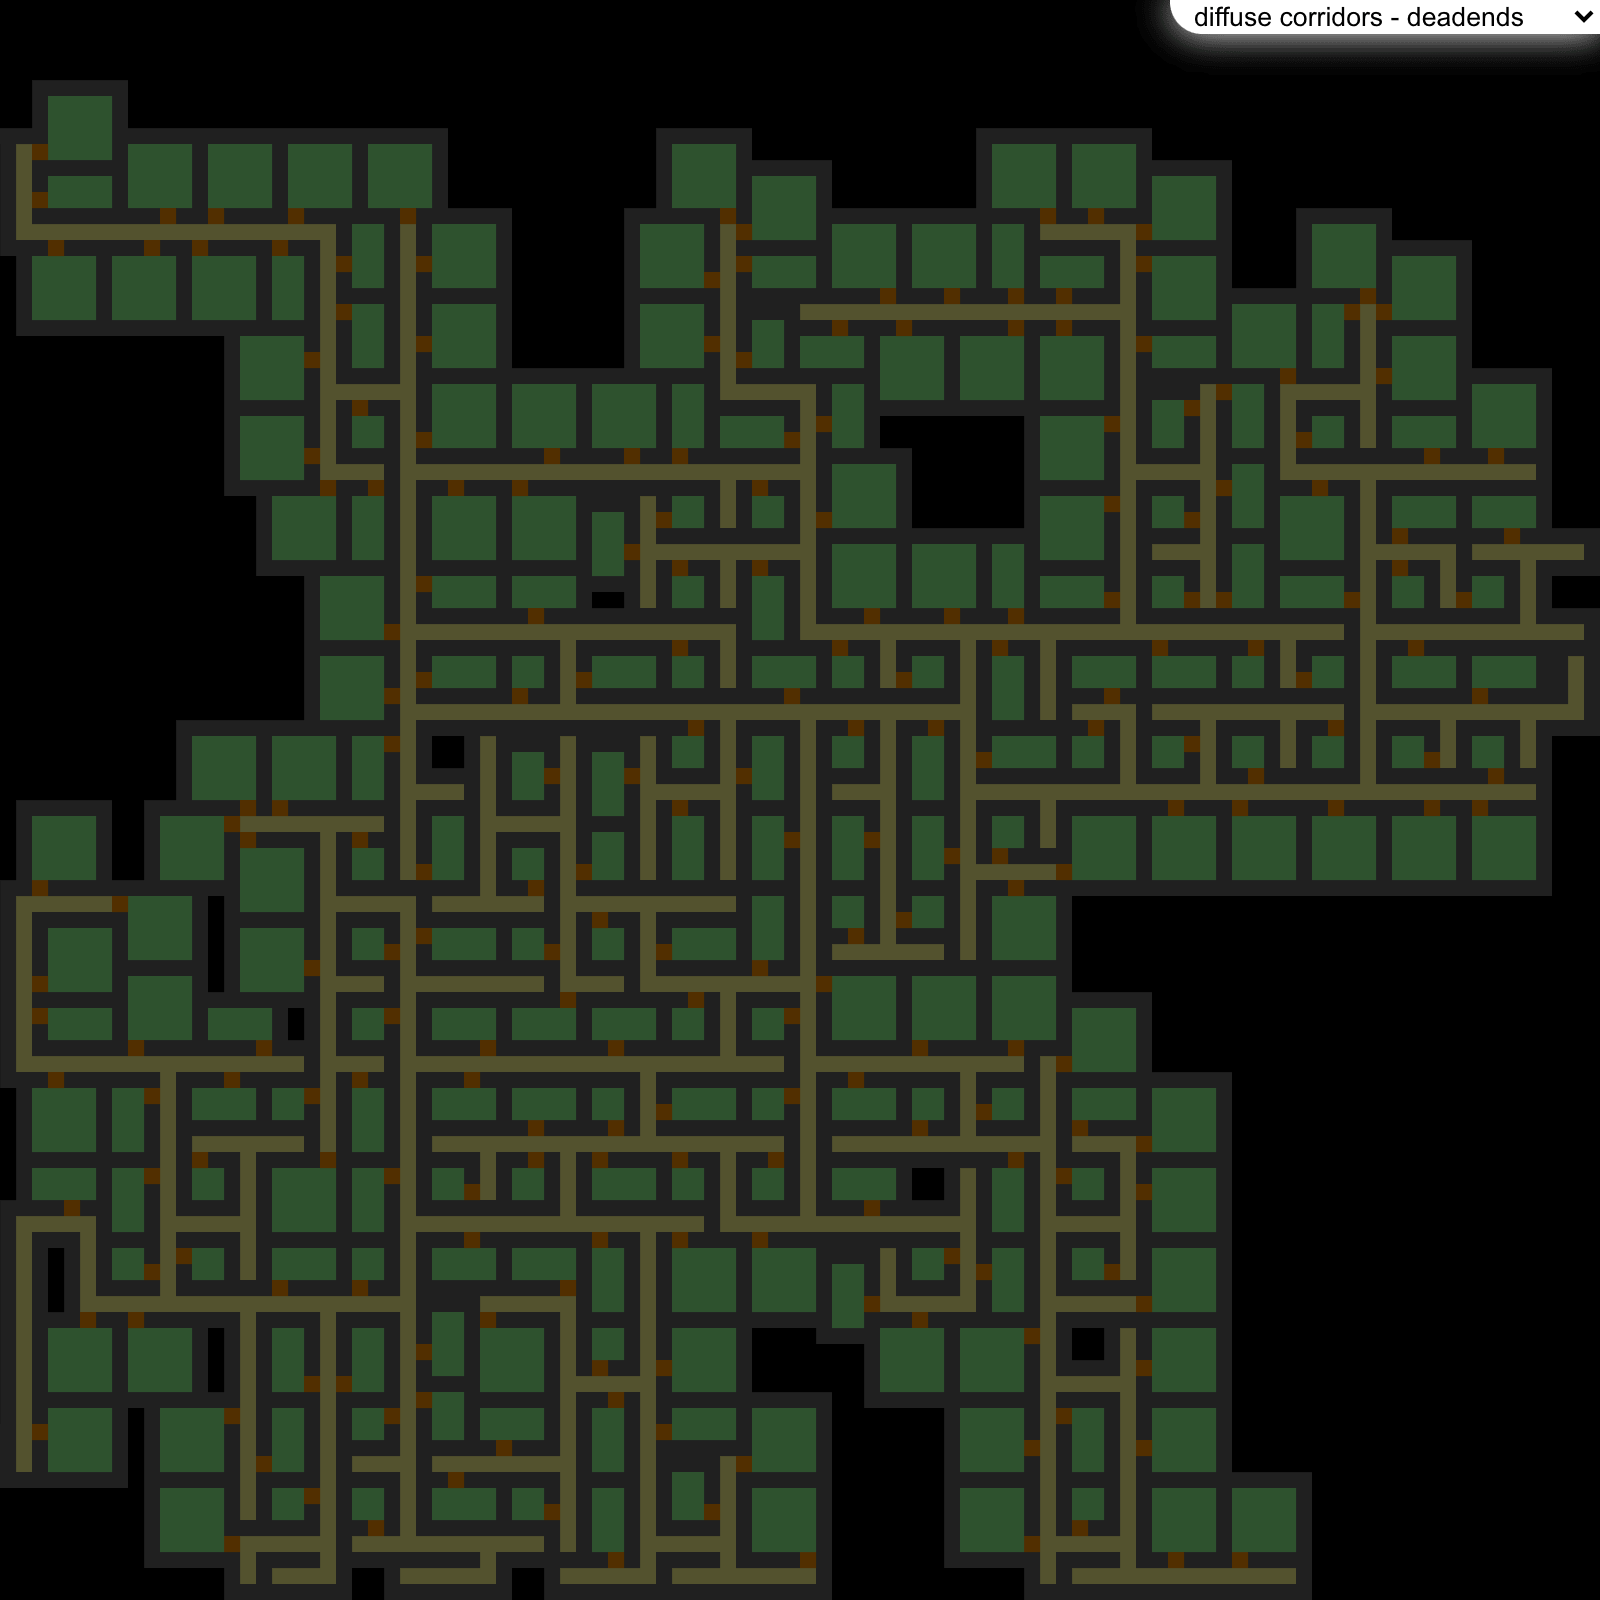 example_diffuse_corridors_deadends.png